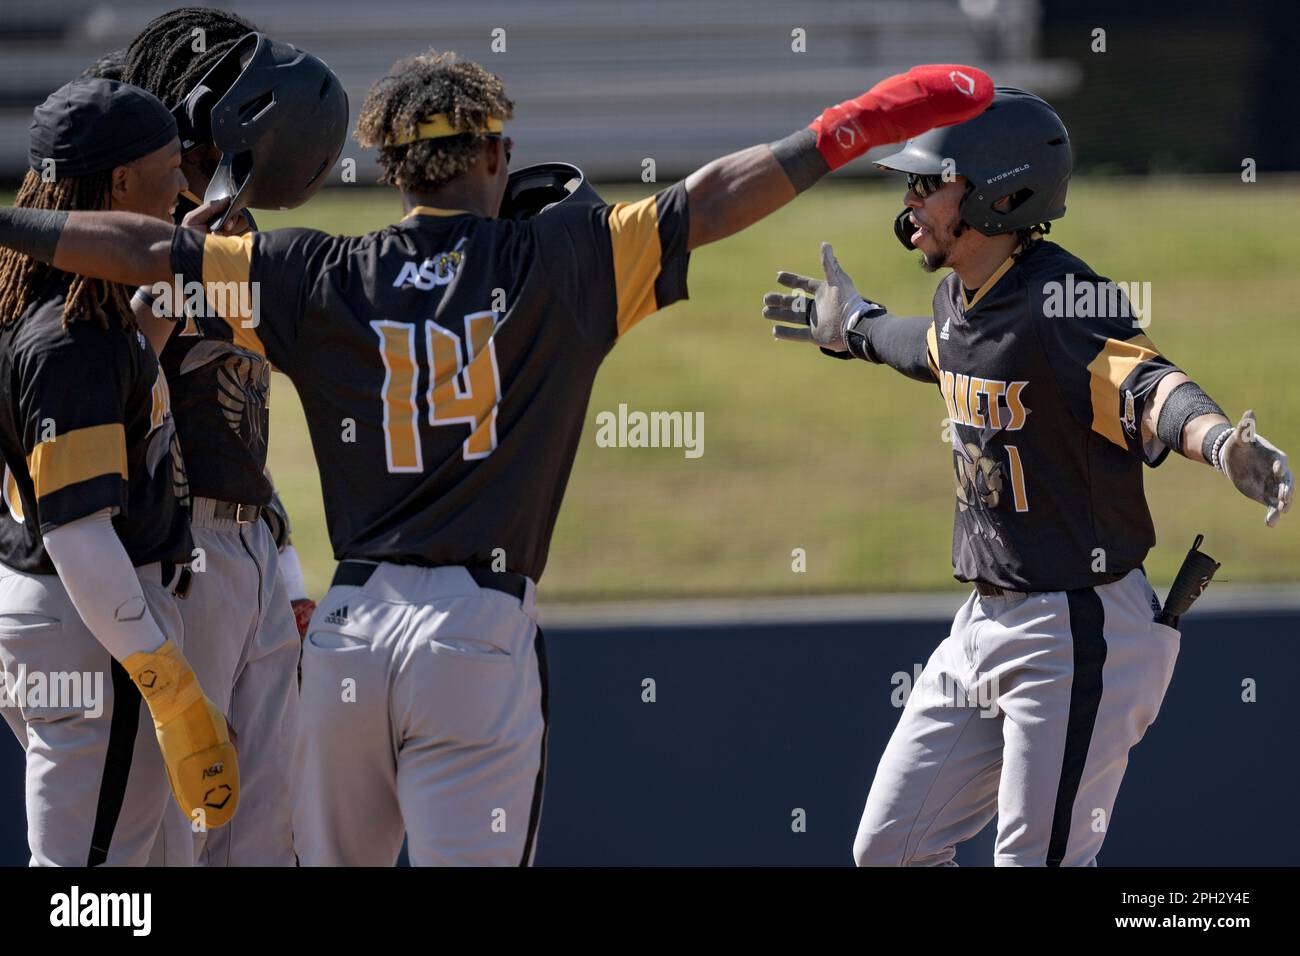 Alabama State infielder Randy Flores (1) celebrates a home run with Alabama  State catcher Jamal George (14) and other players during an NCAA baseball  game against Jackson State on Saturday, March 25